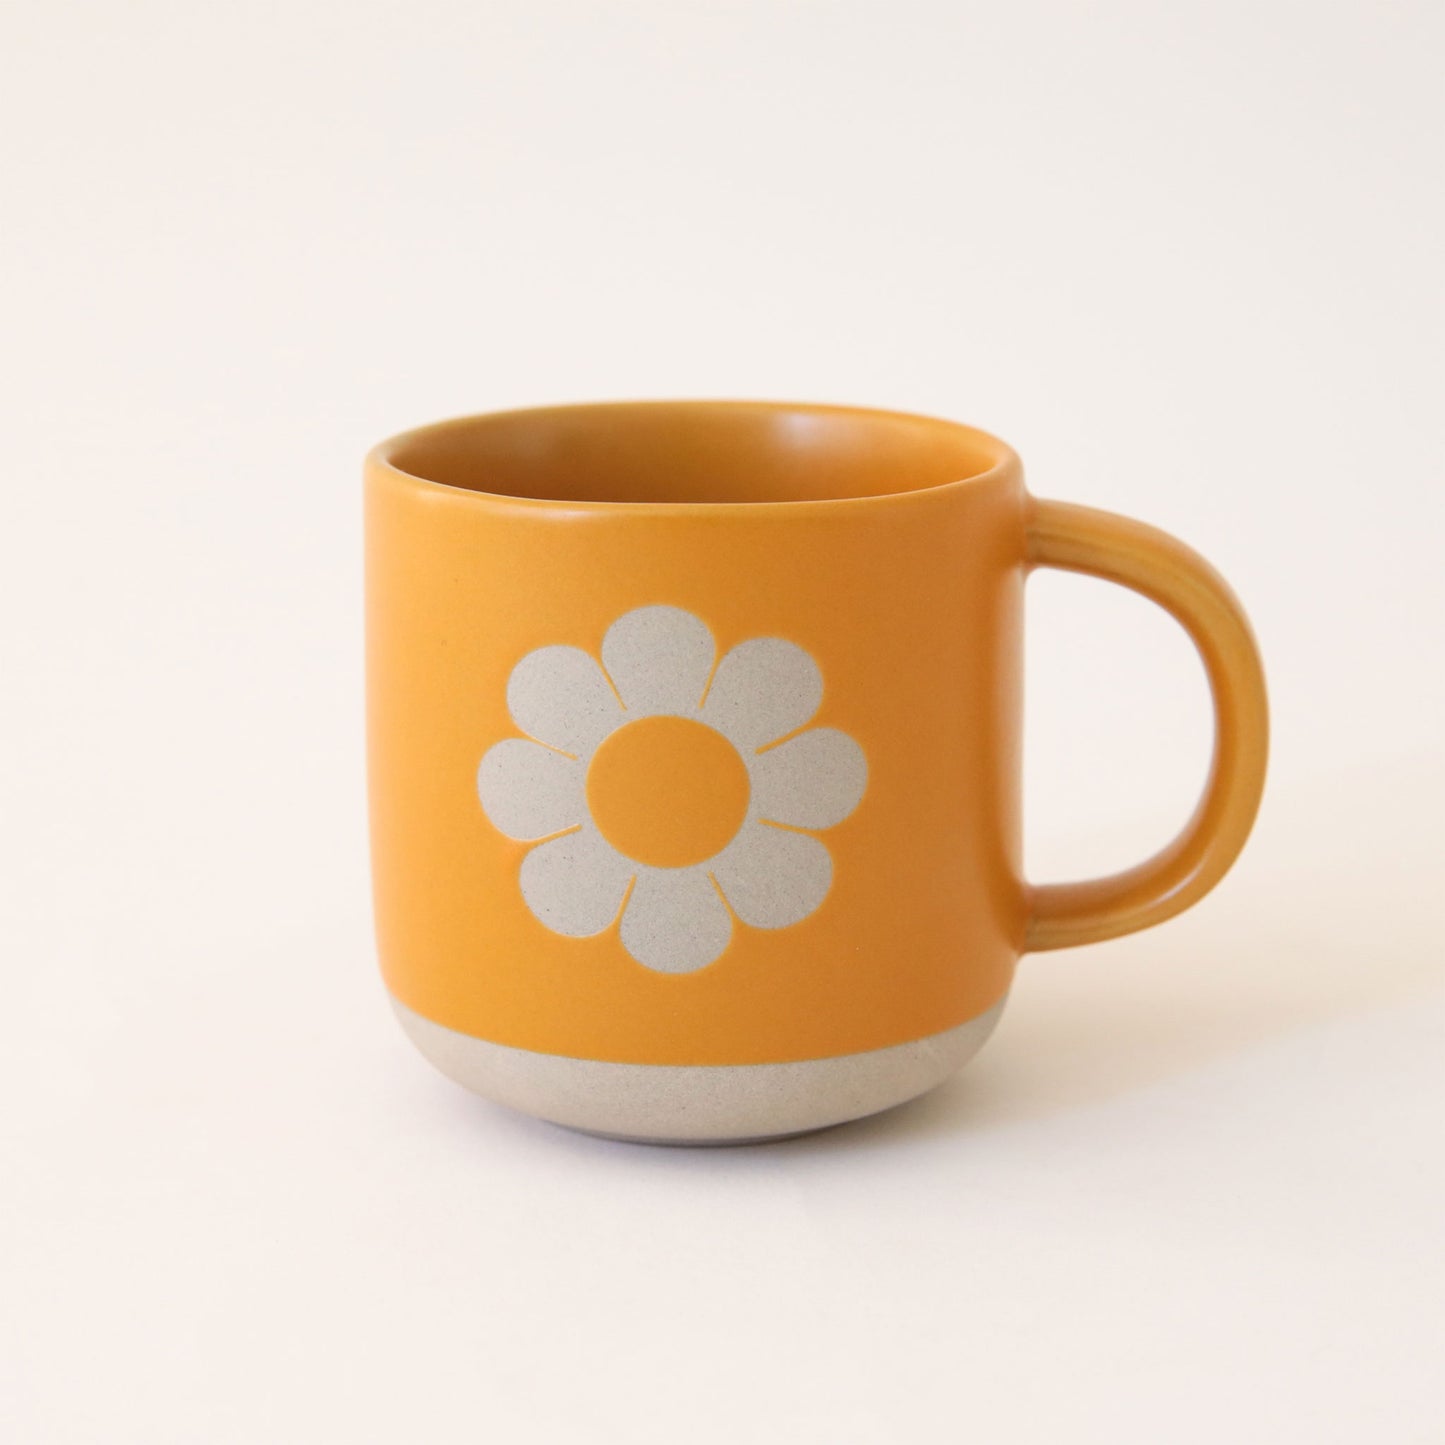 Natural clay mug painted tangerine orange with silhouette of classic daisy flower on the front. The base of the mug is unpainted, revealing natural clay. 